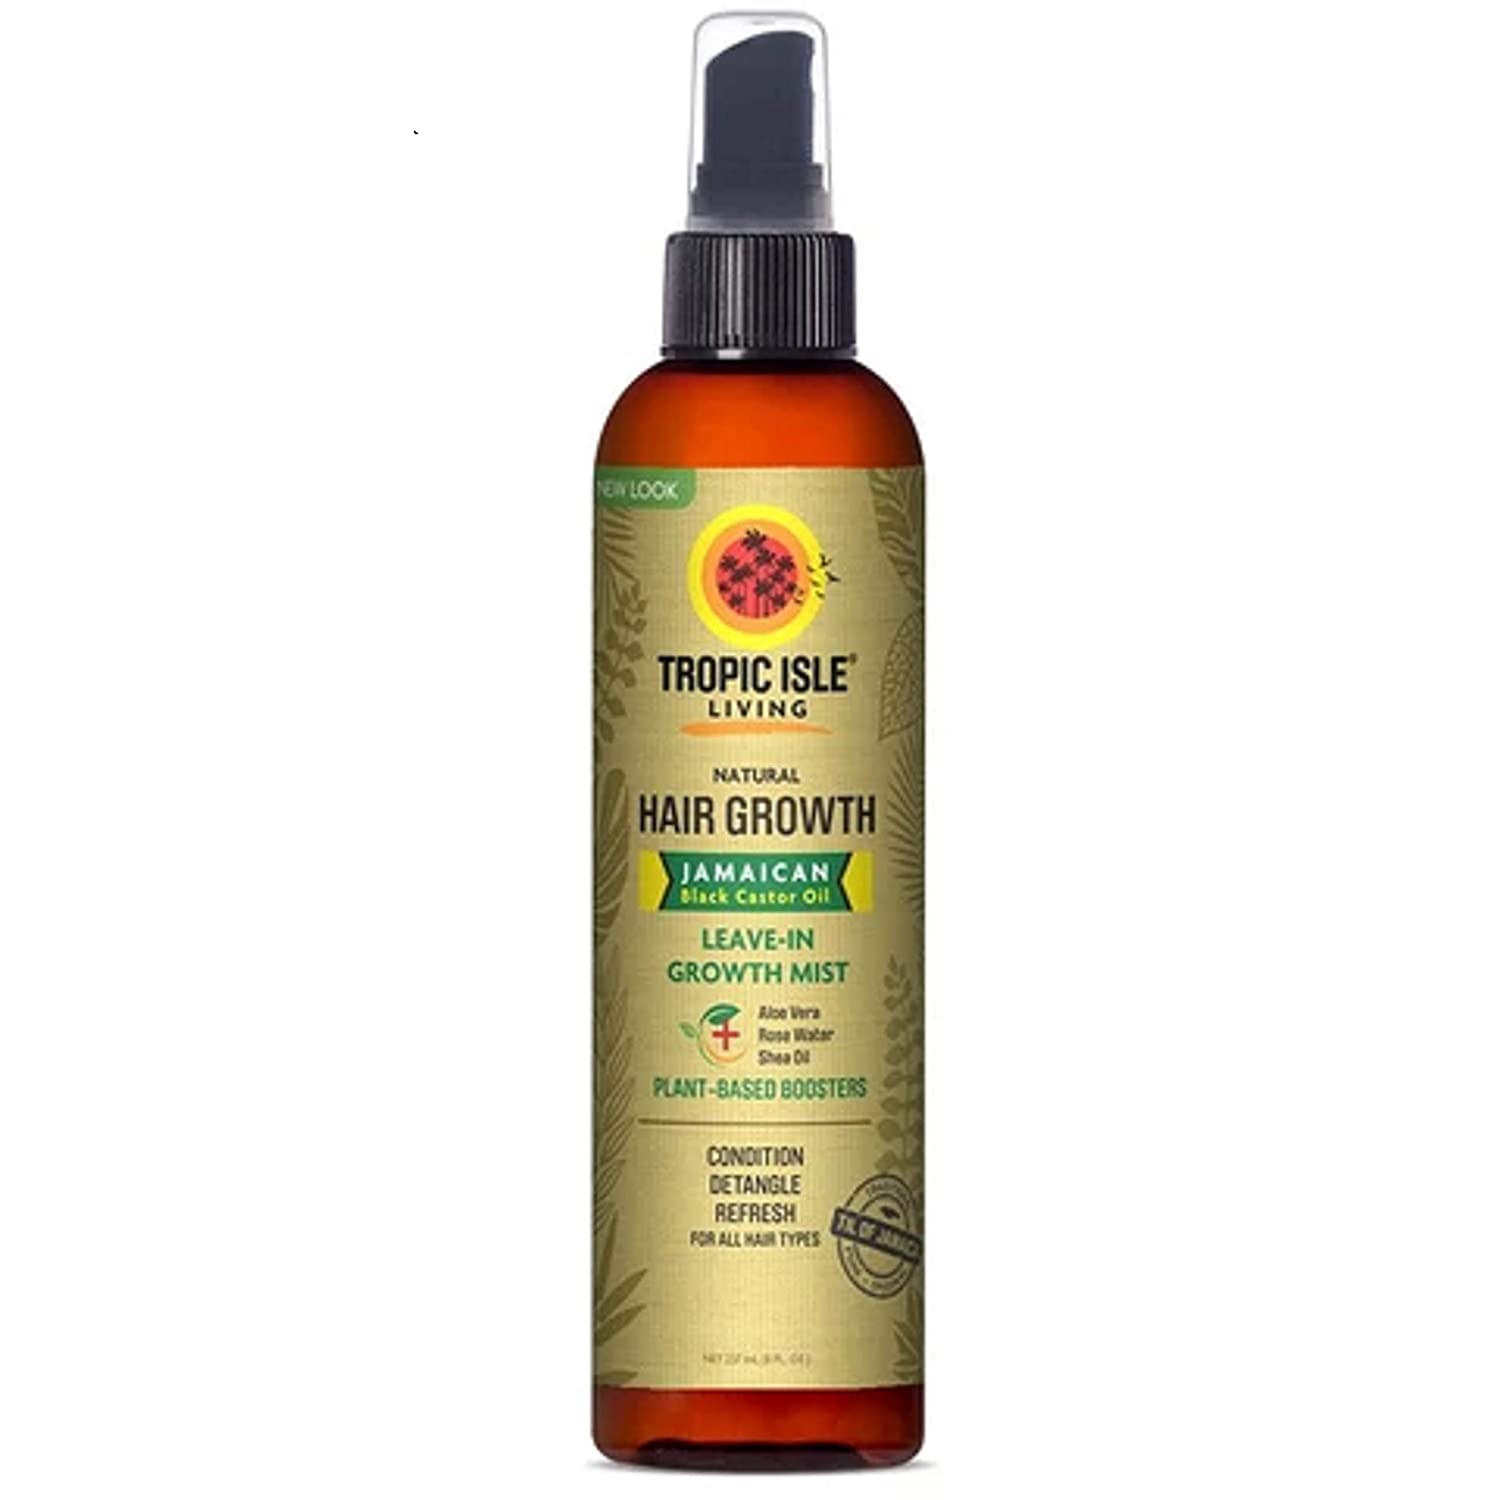 Image of Tropic Isle Living Jamaican Black Castor Oil Daily Hair Growth Leave-in Conditioning Mist 8oz